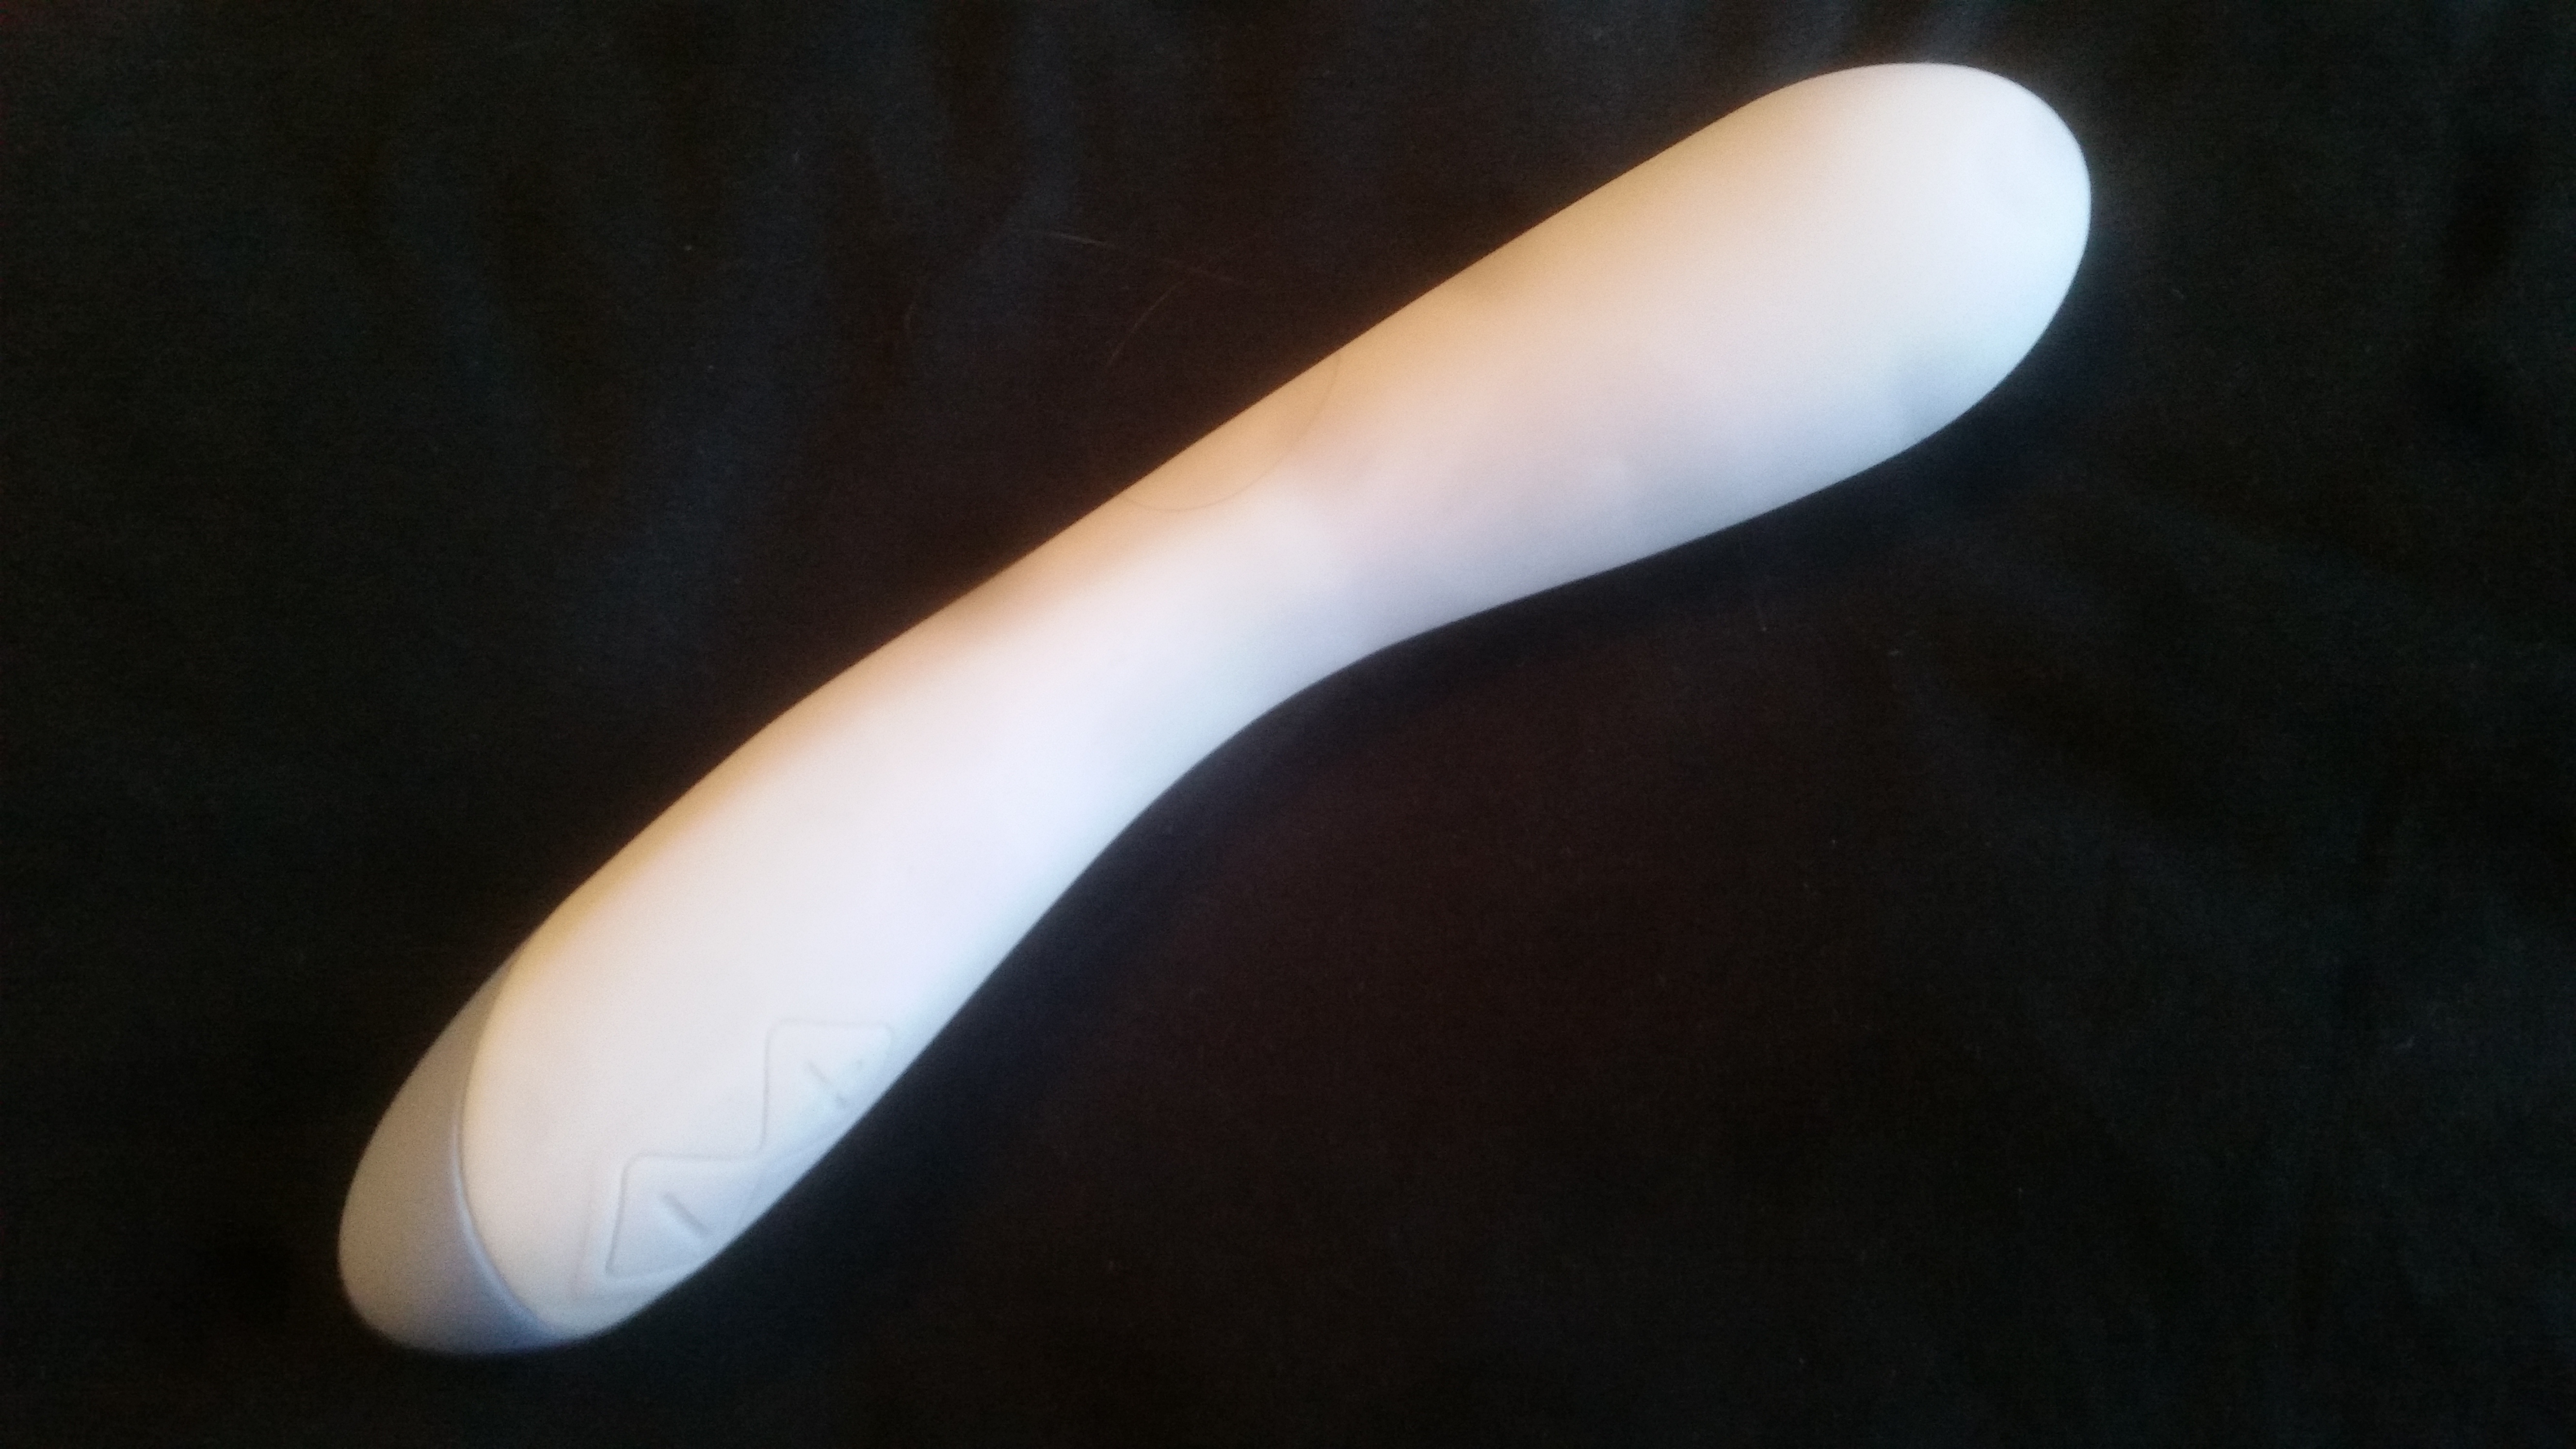 The Sola Cue blue vibrator lying on a black pillow.